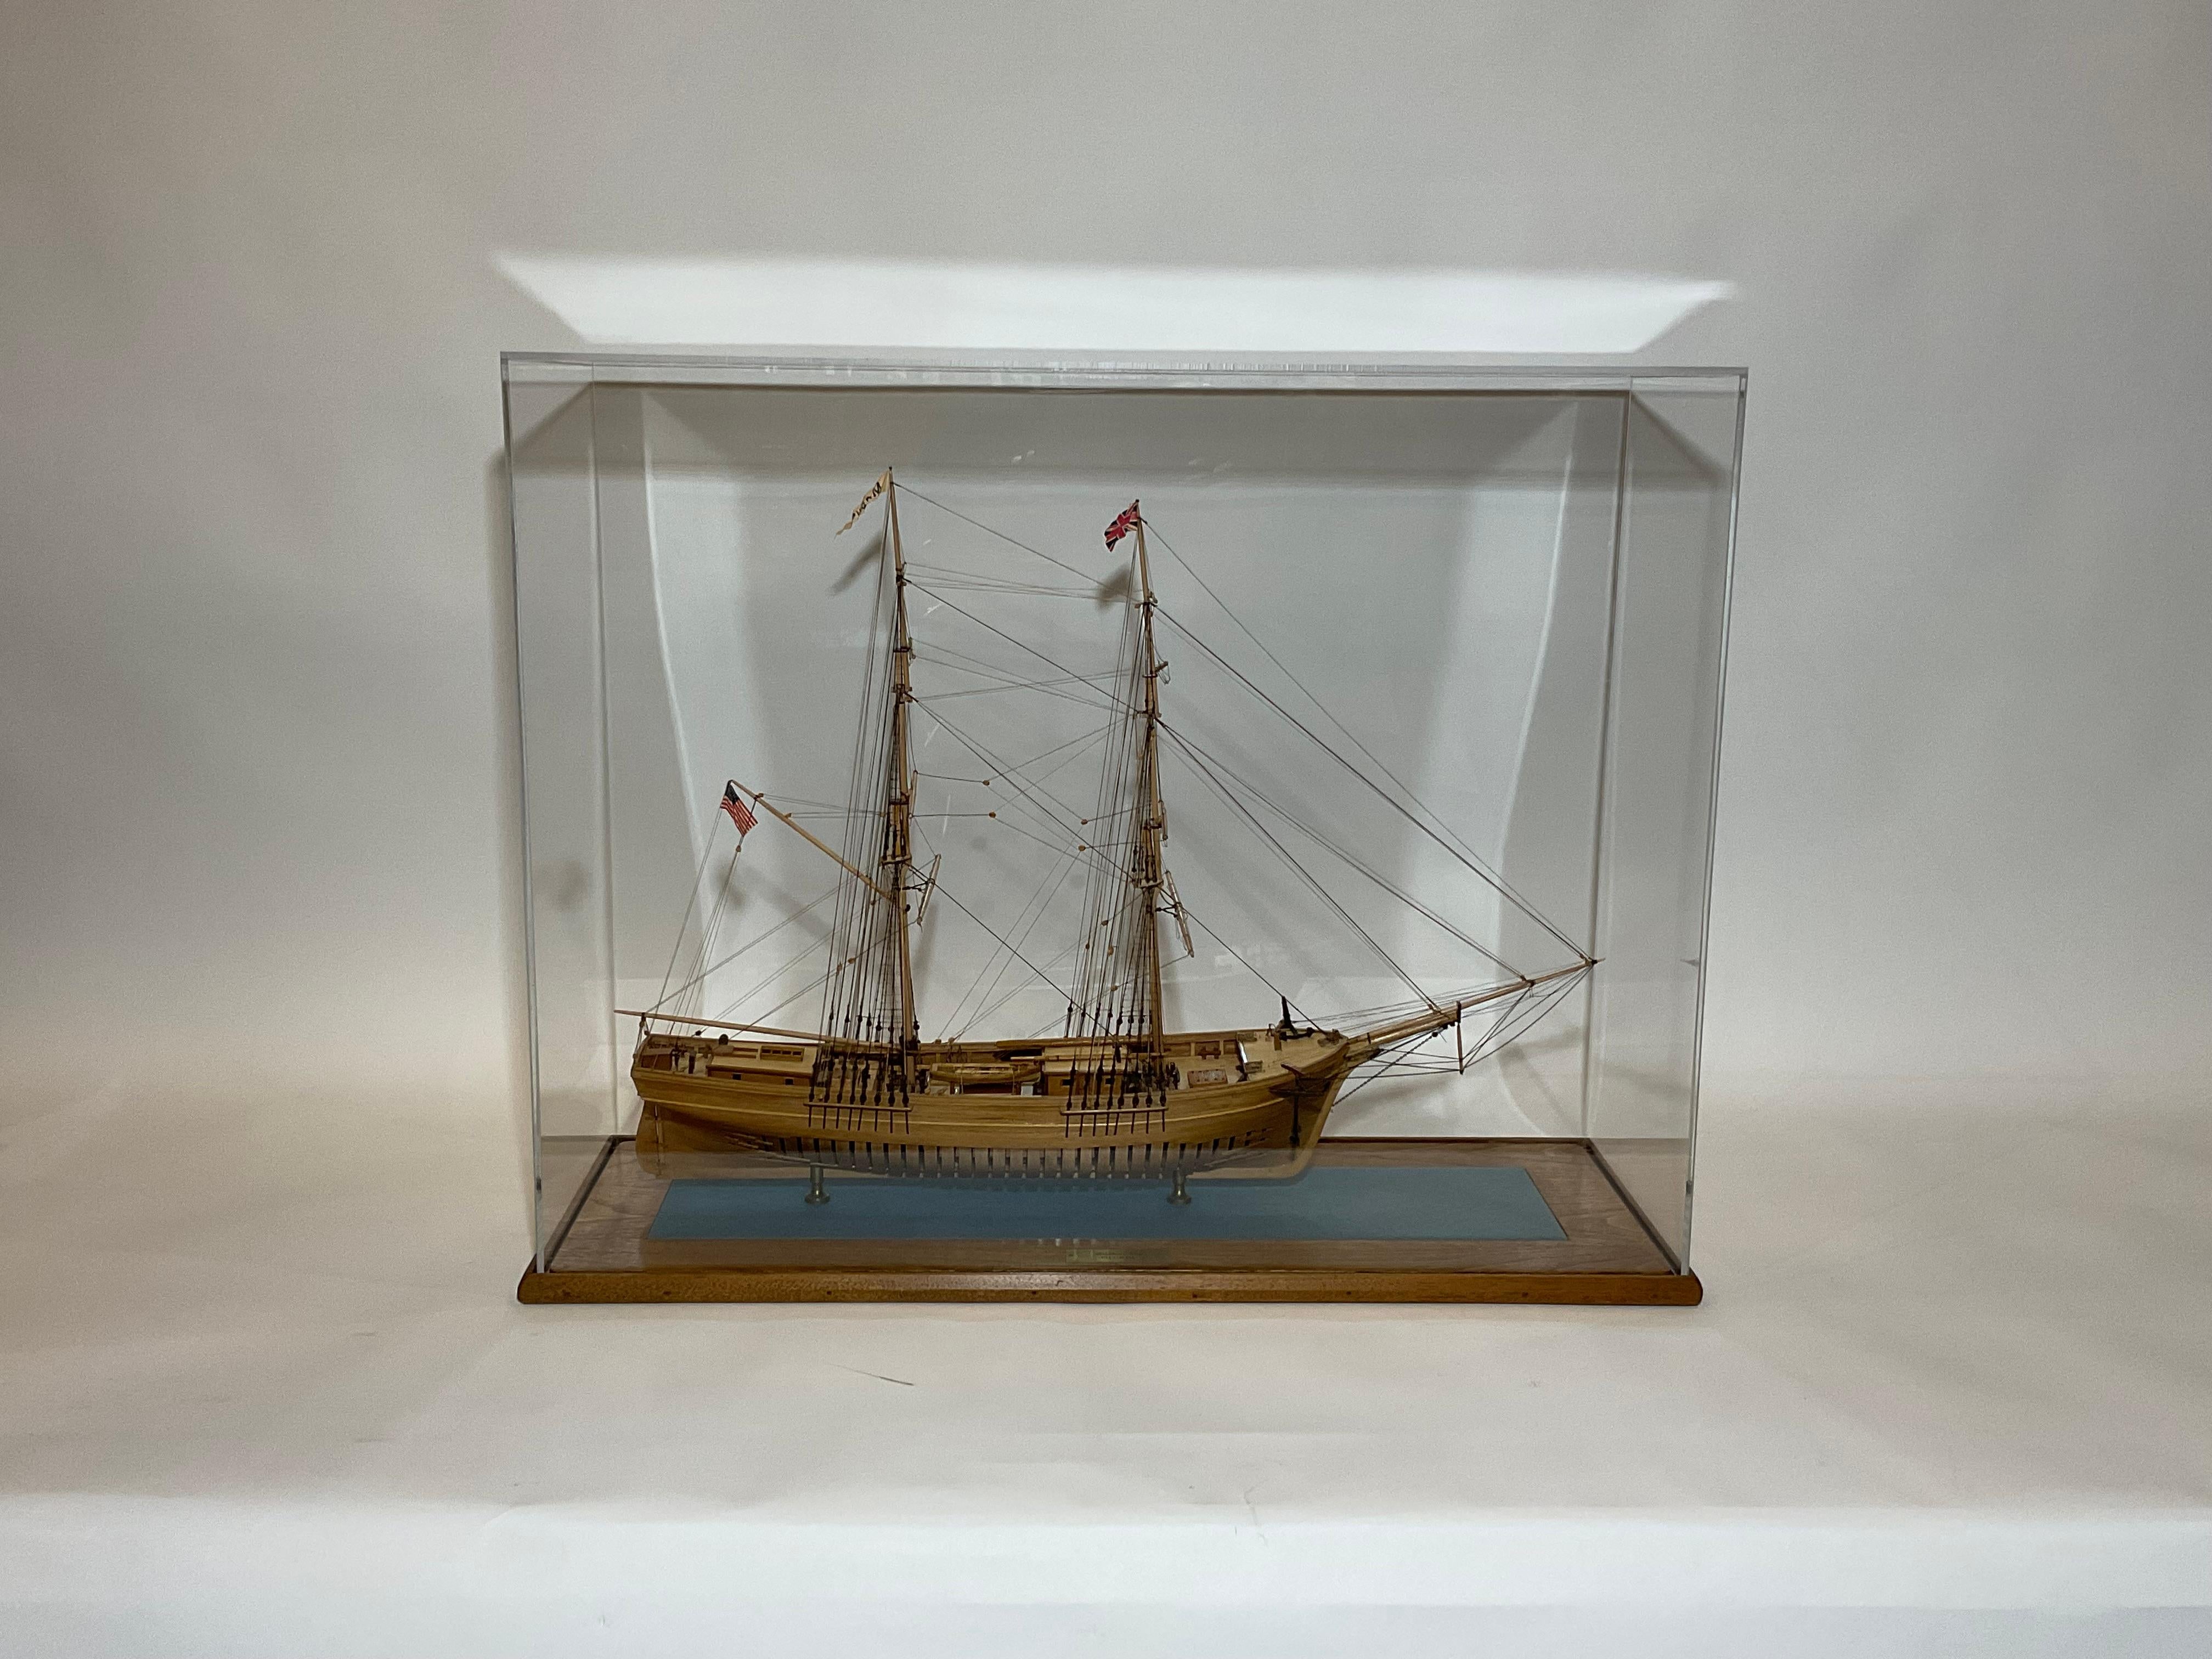 Plank on frame model of the American brig 